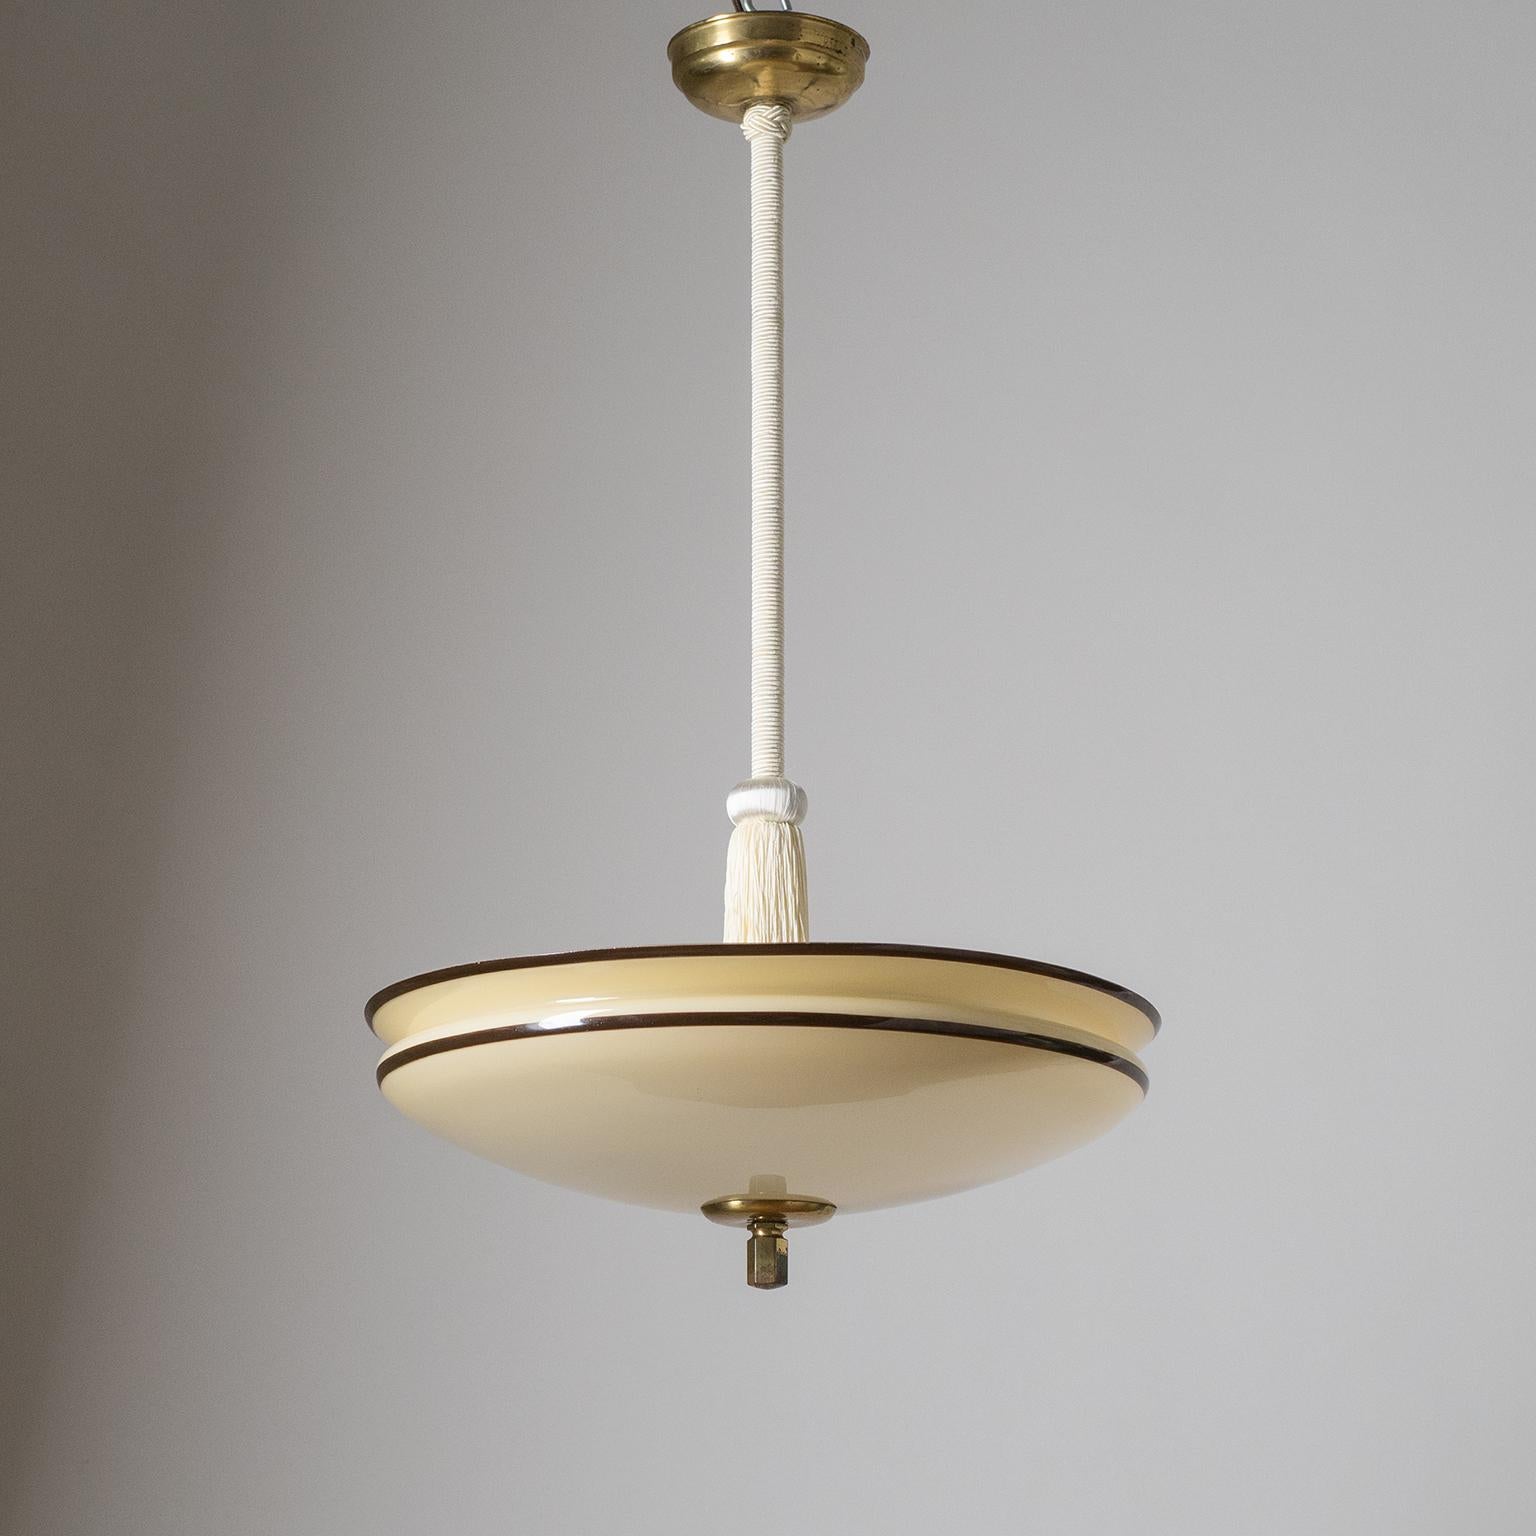 Art Deco pendant from the 1930s with an enameled glass diffuser. The shallow bowl shaped glass is sand-colored with a white inner casing and has two dark brown stripes painted along the rim. Stem with off-white passementerie trimmings and tassel.